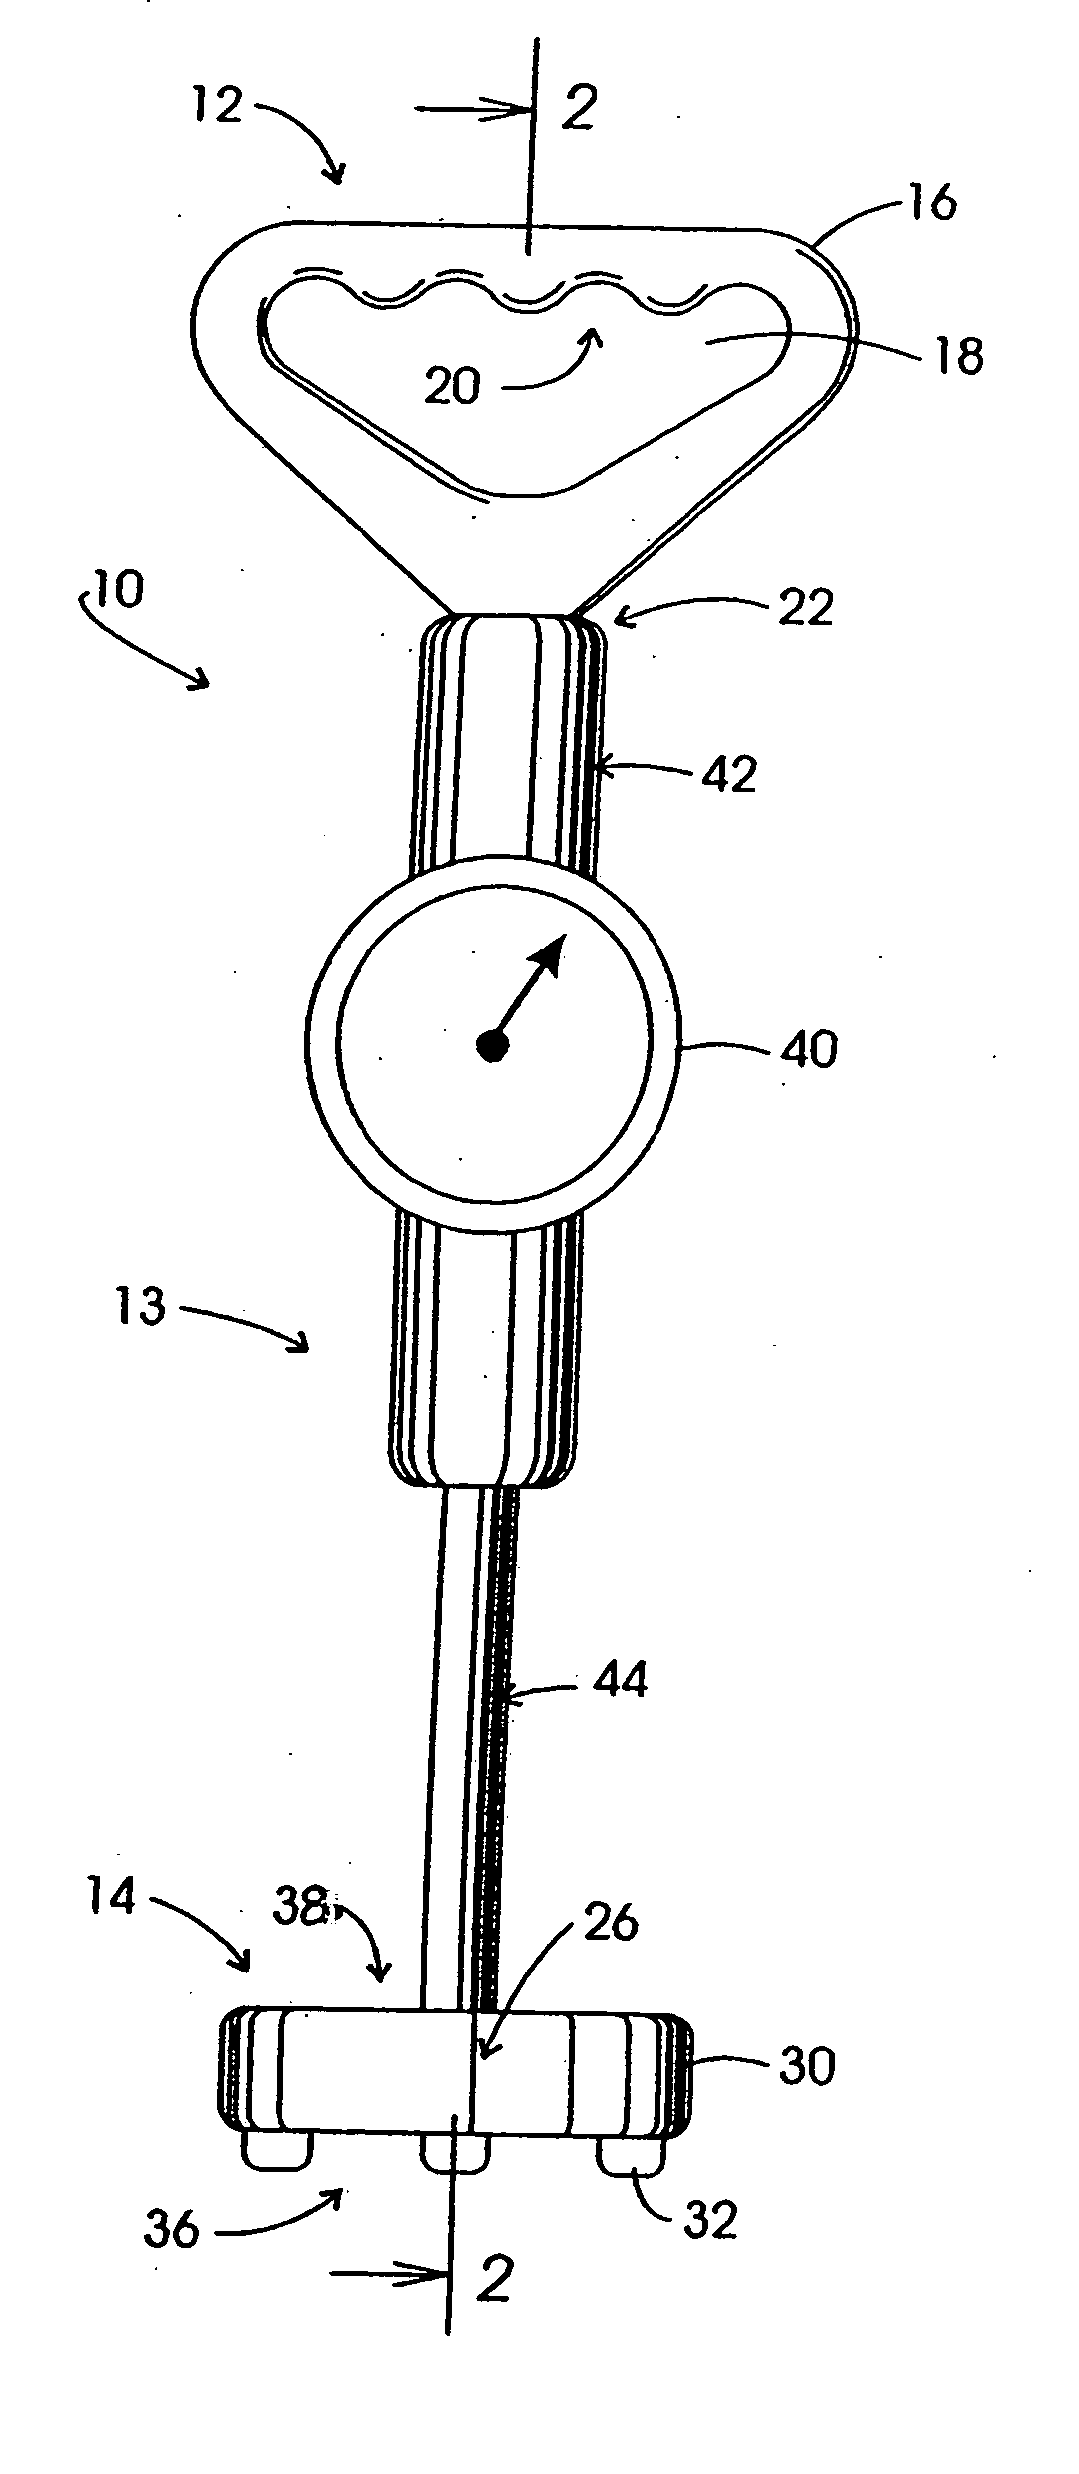 Apparatus, systems, and methods for continuous pressure technique therapy